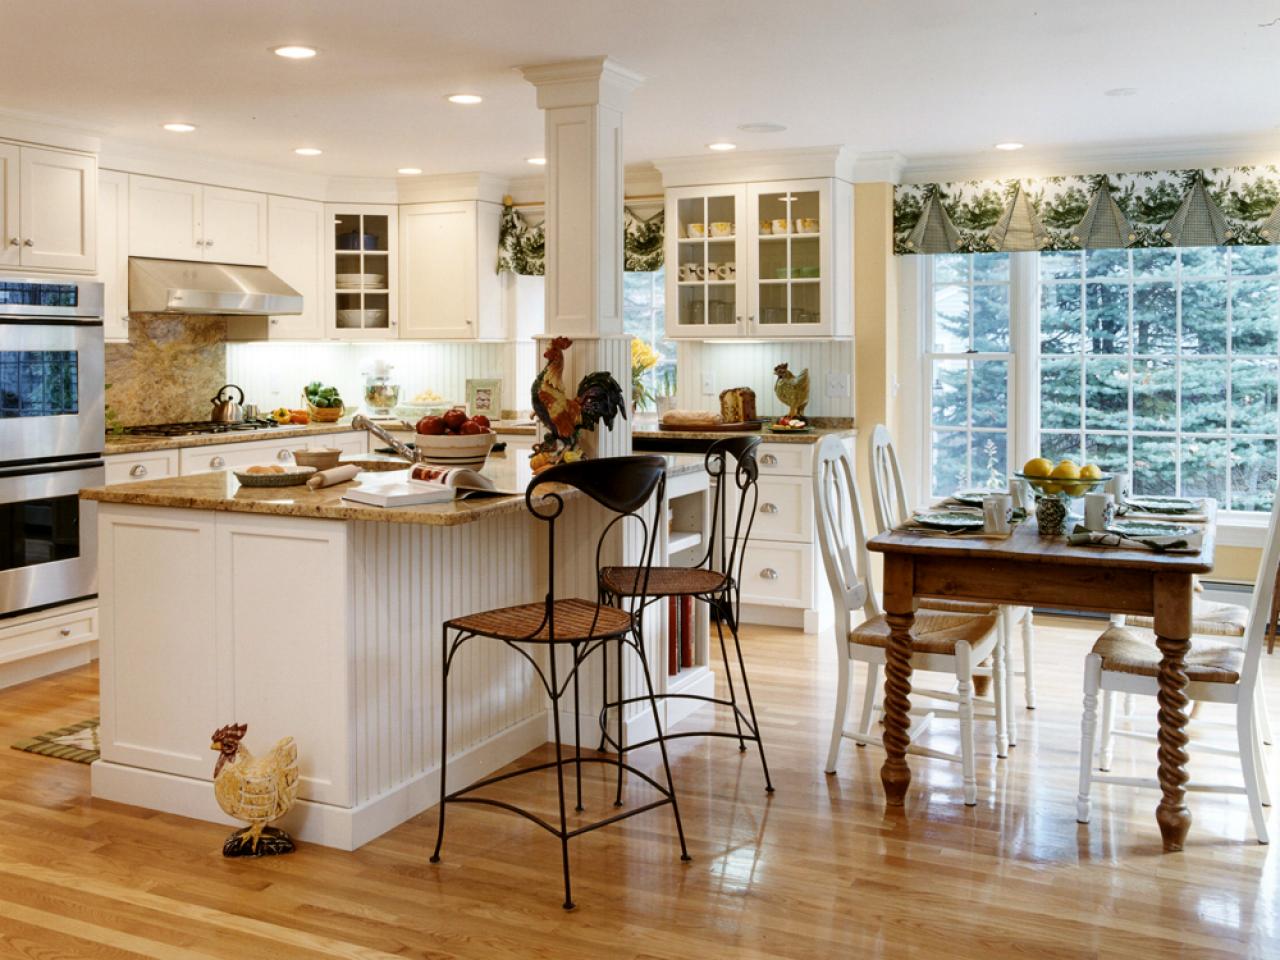 Guide to Creating a Country Kitchen   HGTV